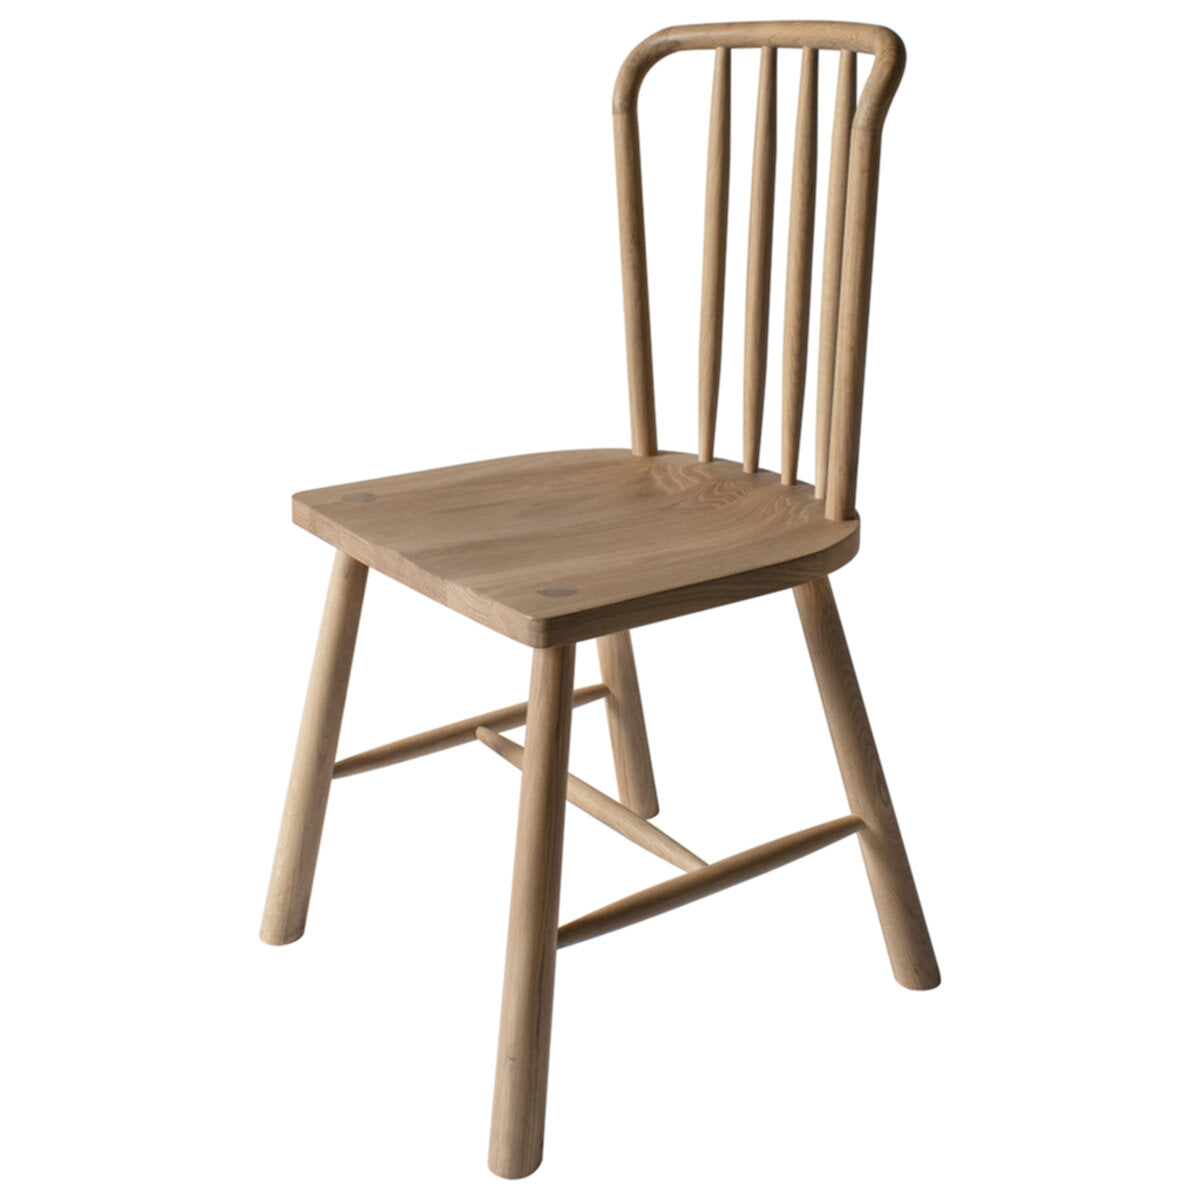 Emiko Metal And Wood Dining Chair (2 Pack)